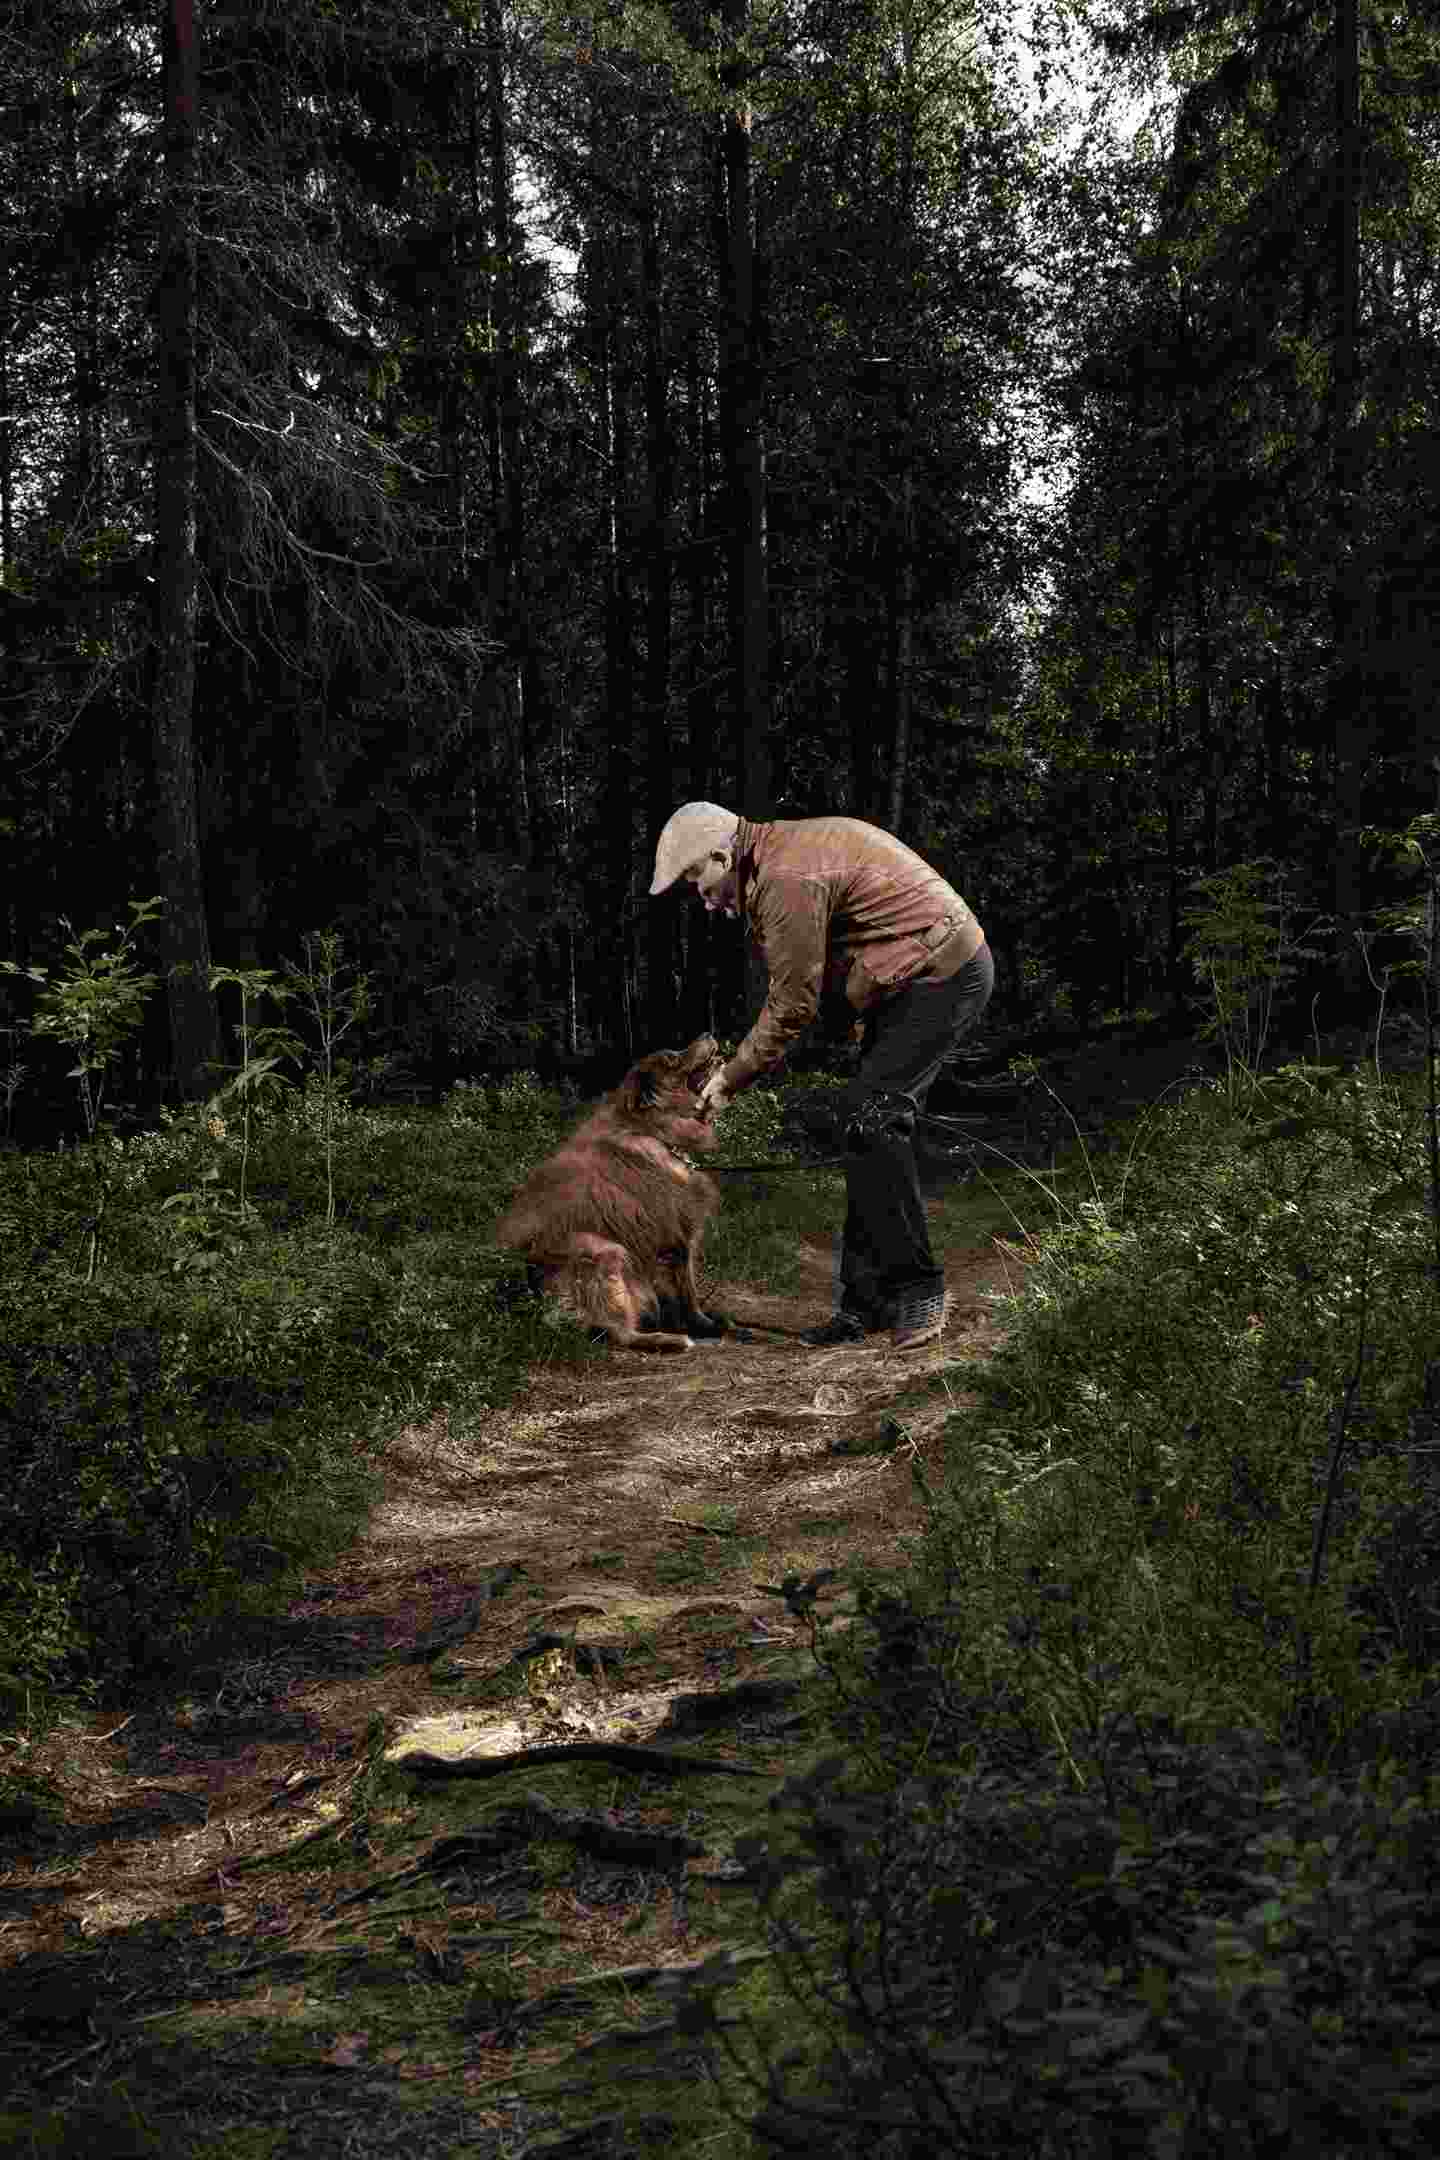 A person stroking a dog in a forest.